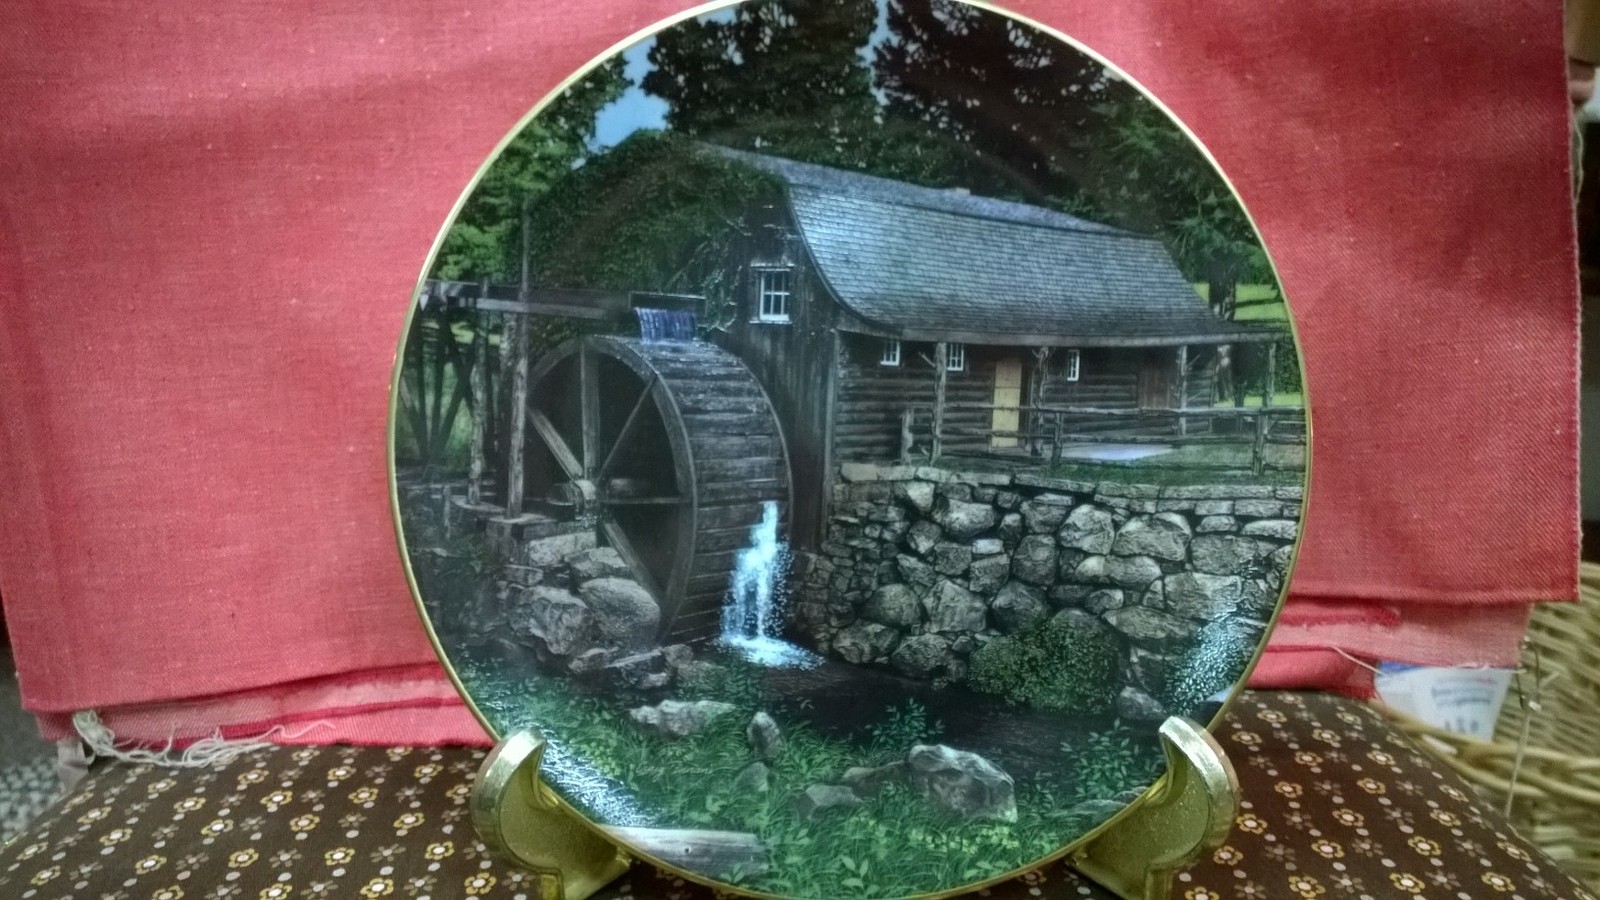 Knowles Old Mill Stream Collection "NEW LONDON GRIST MILL" PLATE 1990 - $15.00